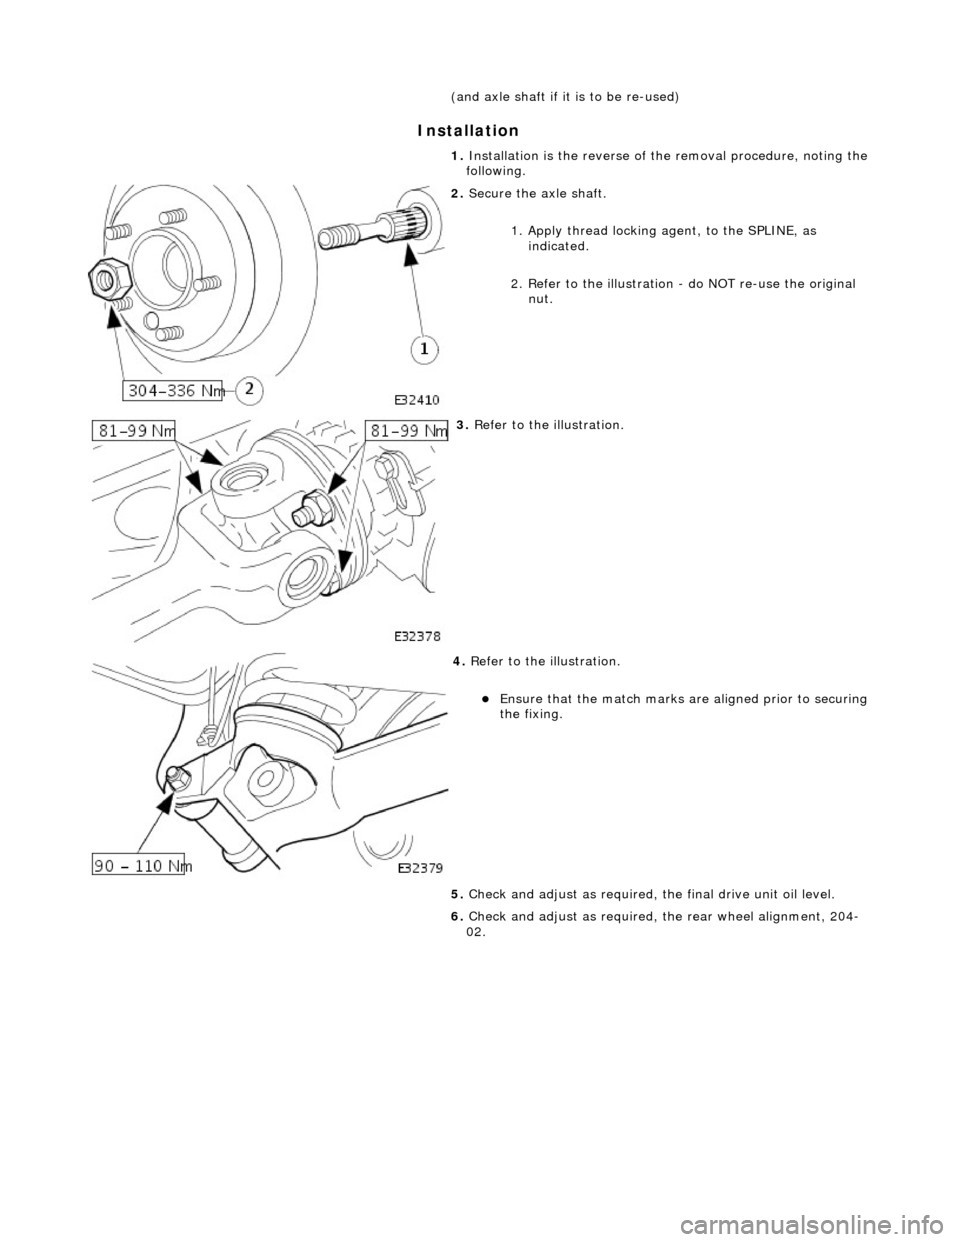 JAGUAR X308 1998 2.G Workshop Manual In
 stallation 
 
  (and axle shaft if i
t
  is to be re-used) 
1.  Installation is the re verse of the removal procedure, noting the 
following. 
 
2.  Secure the axle shaft. 
1.
  Apply thread locki